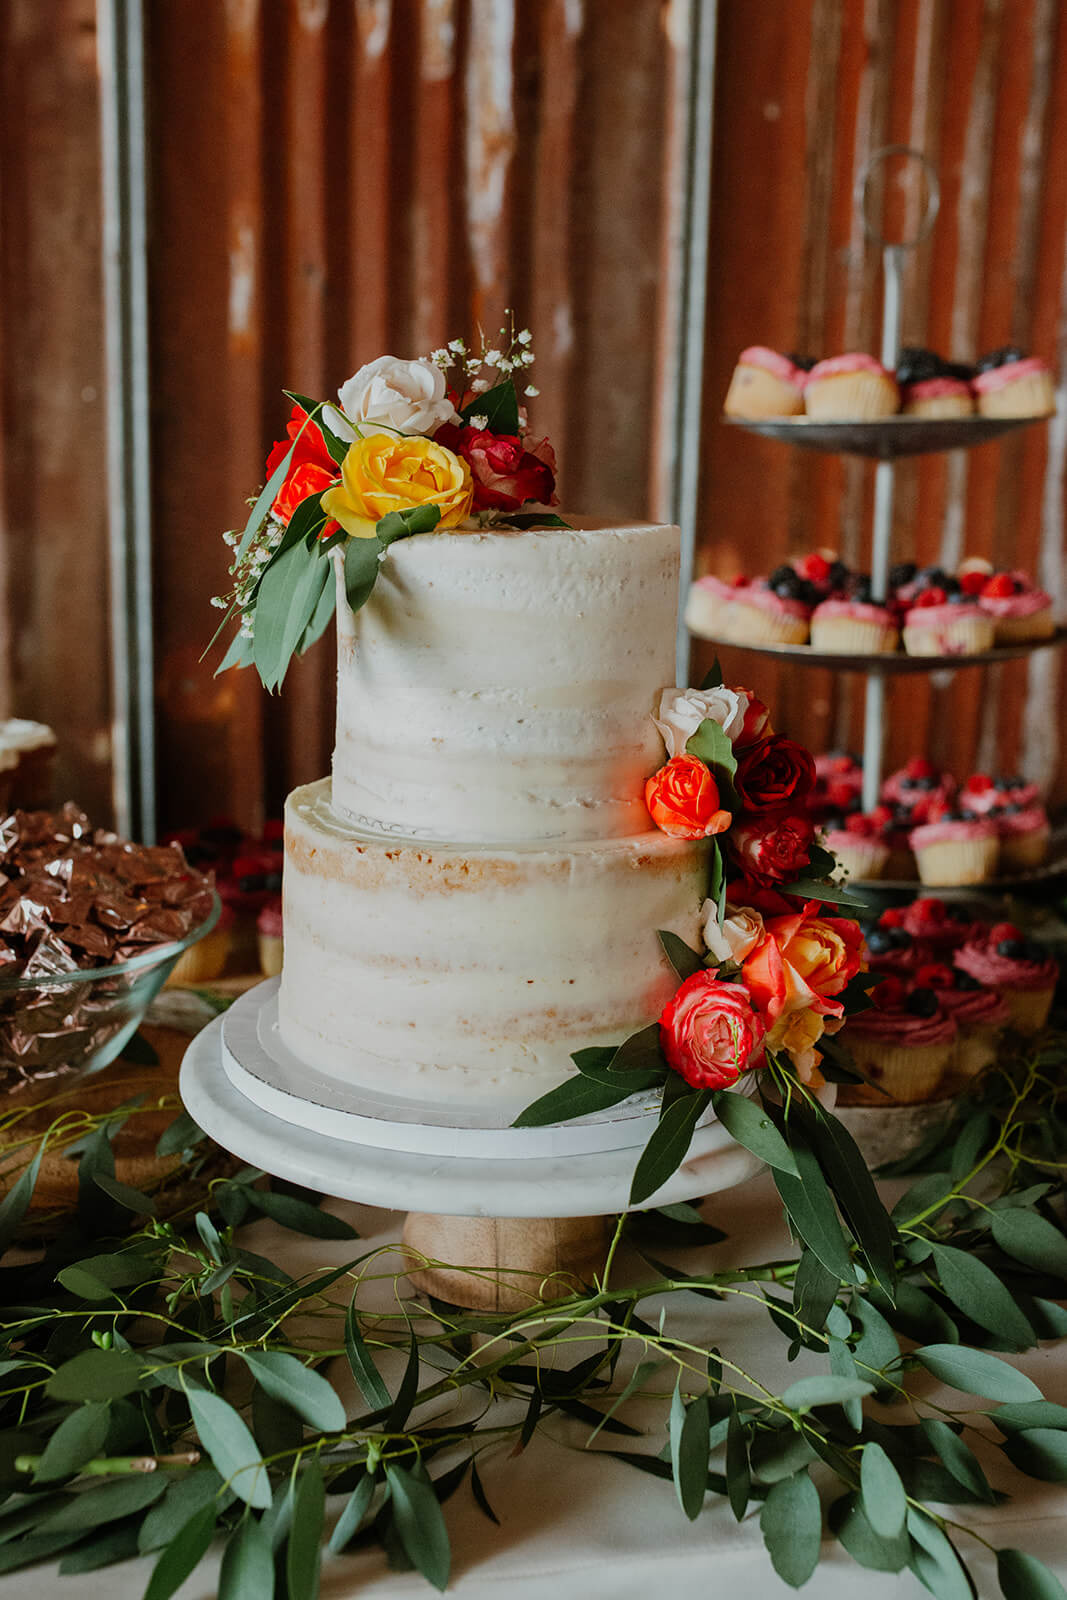 White wedding cake with peach, white, and yellow flowers